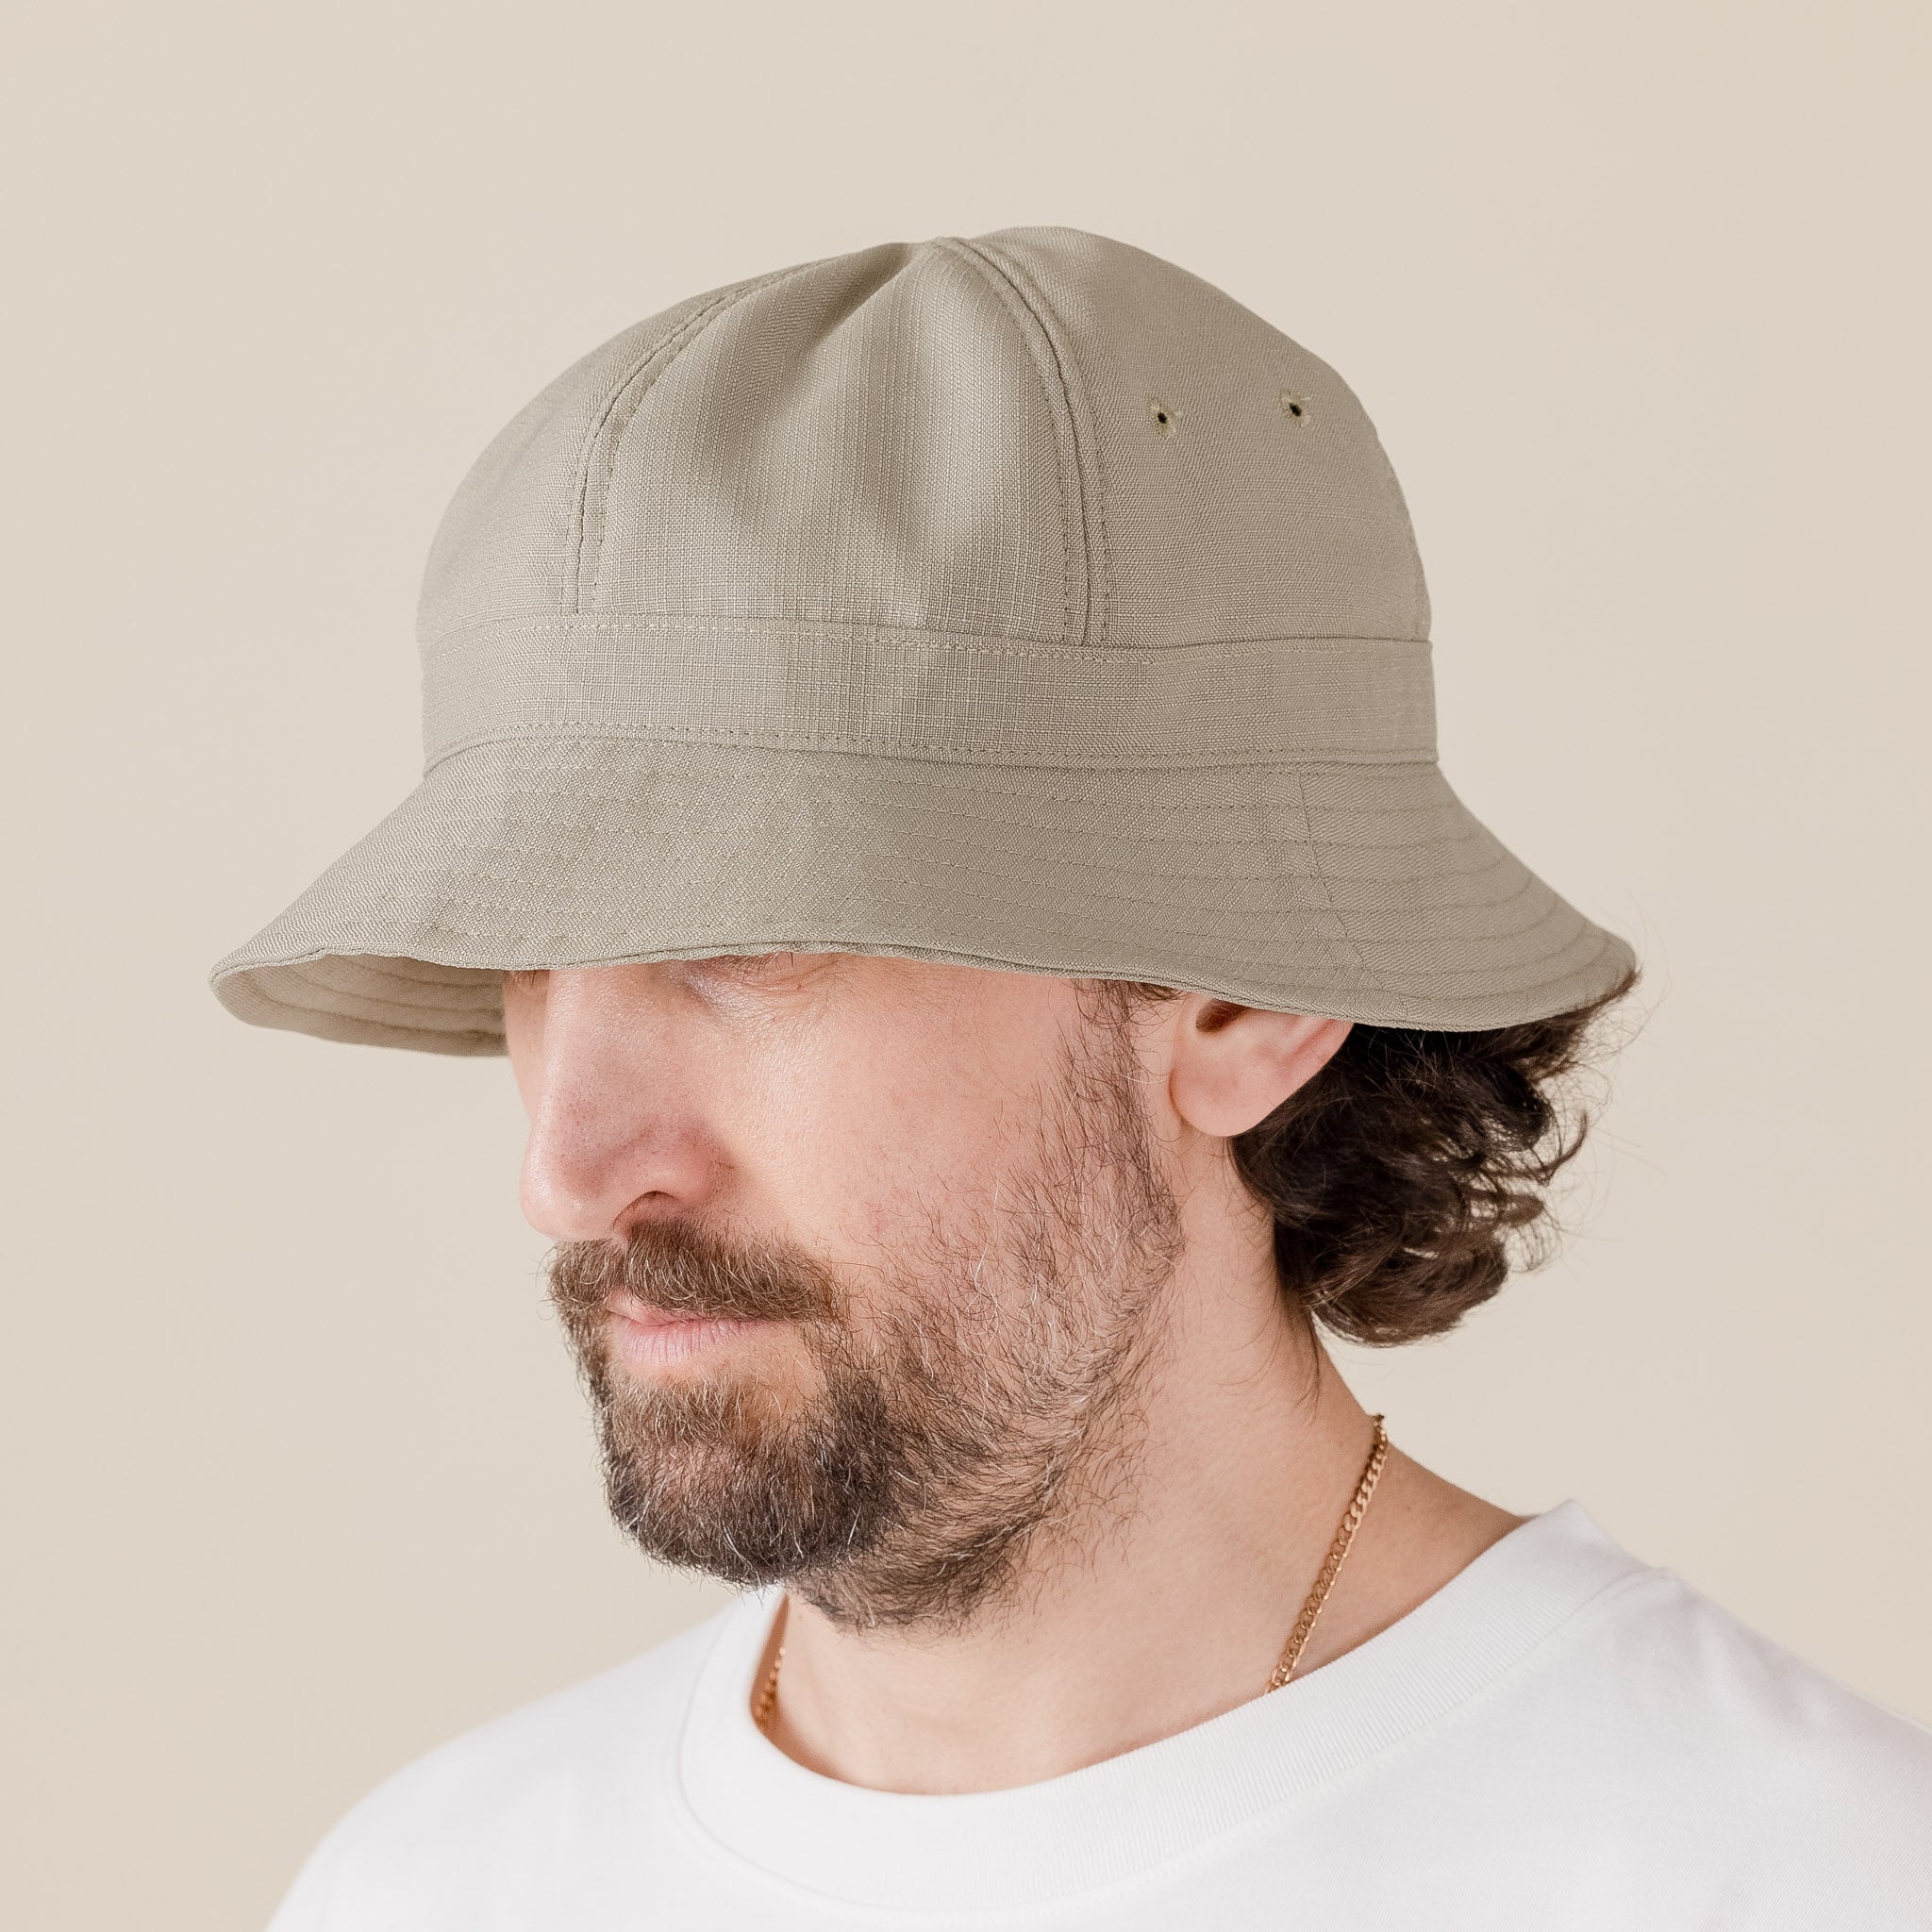 Found Feather - Safari Hat - Pale Green "rip stop kimono safari hat" "found feather hats" "found feather stockists" "found feather Japan"